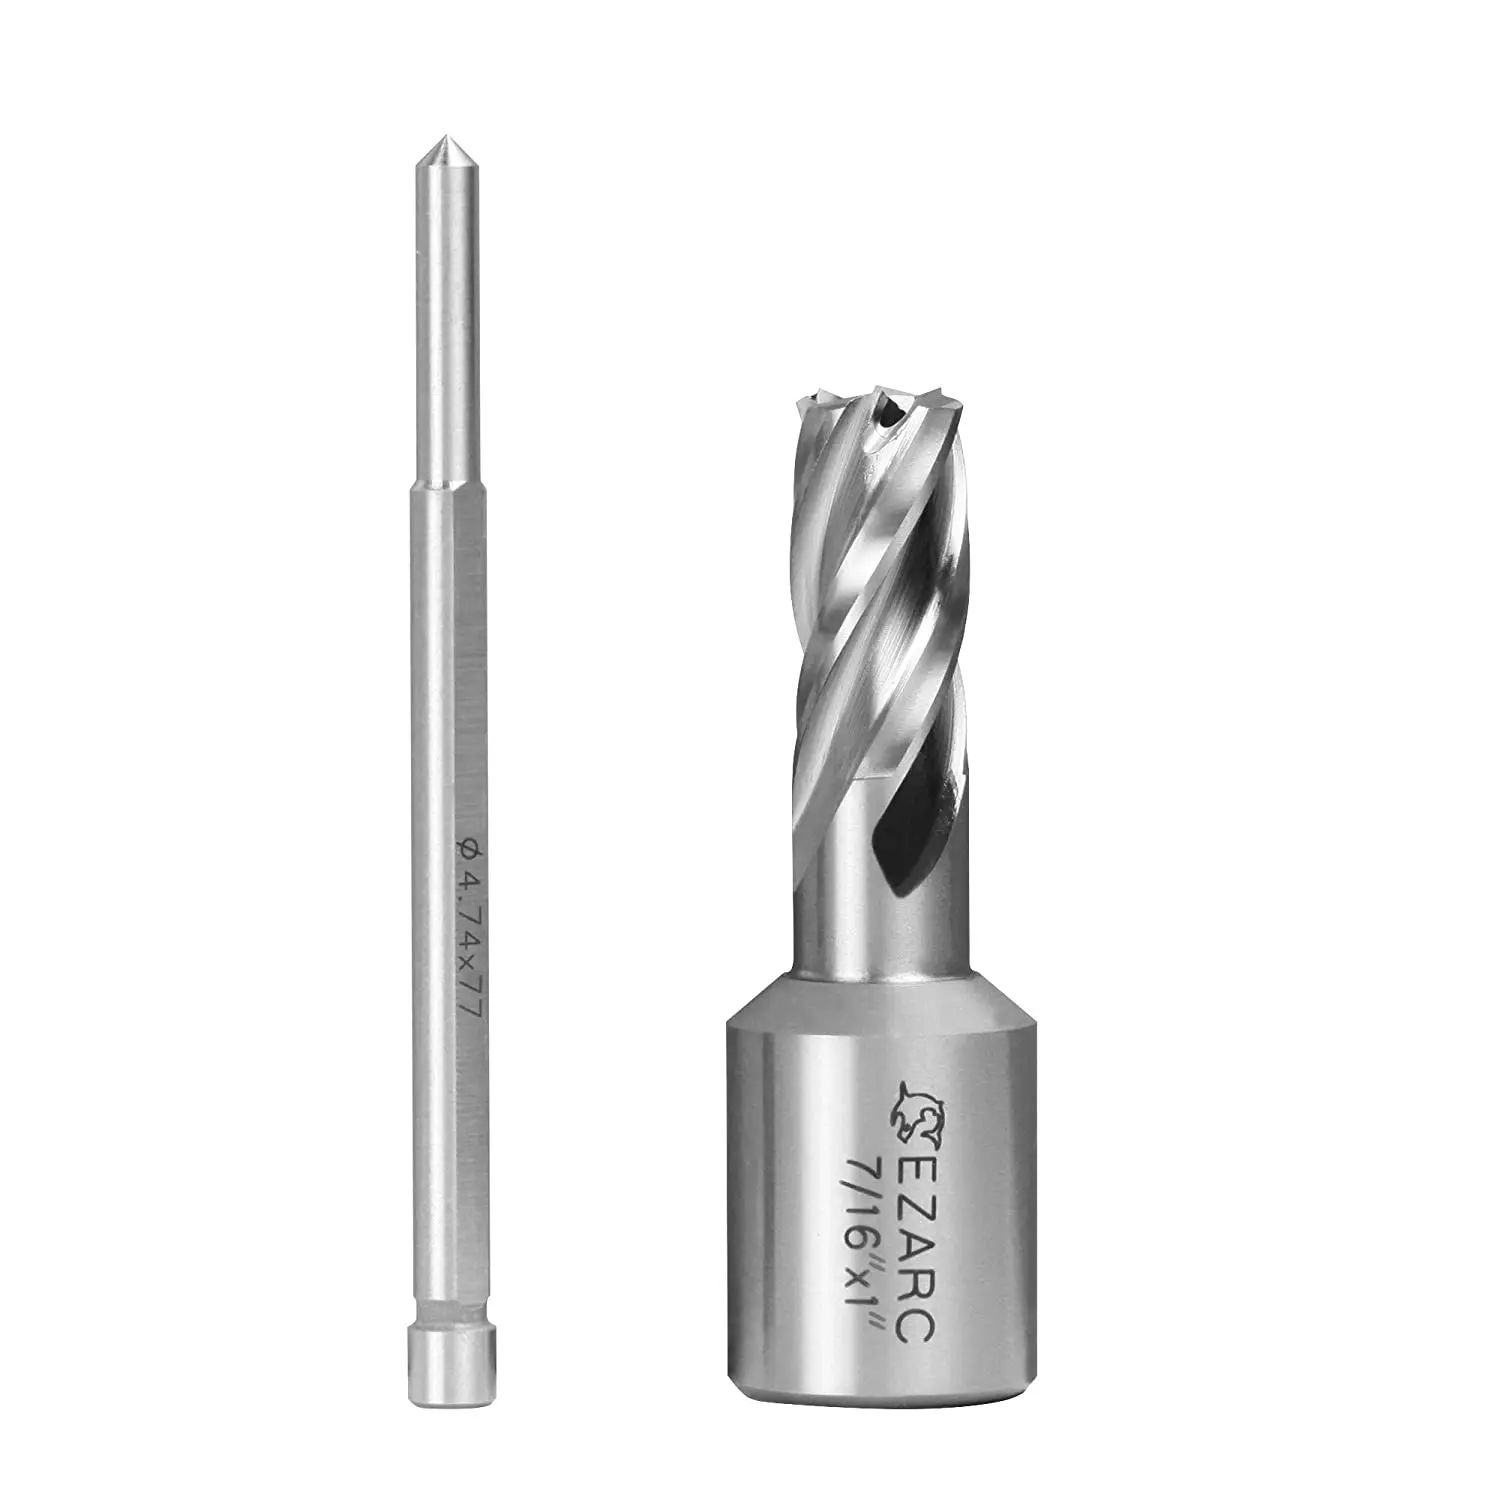 1-1/4-Inch Cutting Diameter x 1-Inch Cutting Depth with 3/4 Weldon Shank for Metal Stainless Steel Drilling Fits Magnetic Drill Press Include Pilot Pin EZARC HSS Annular Cutter 